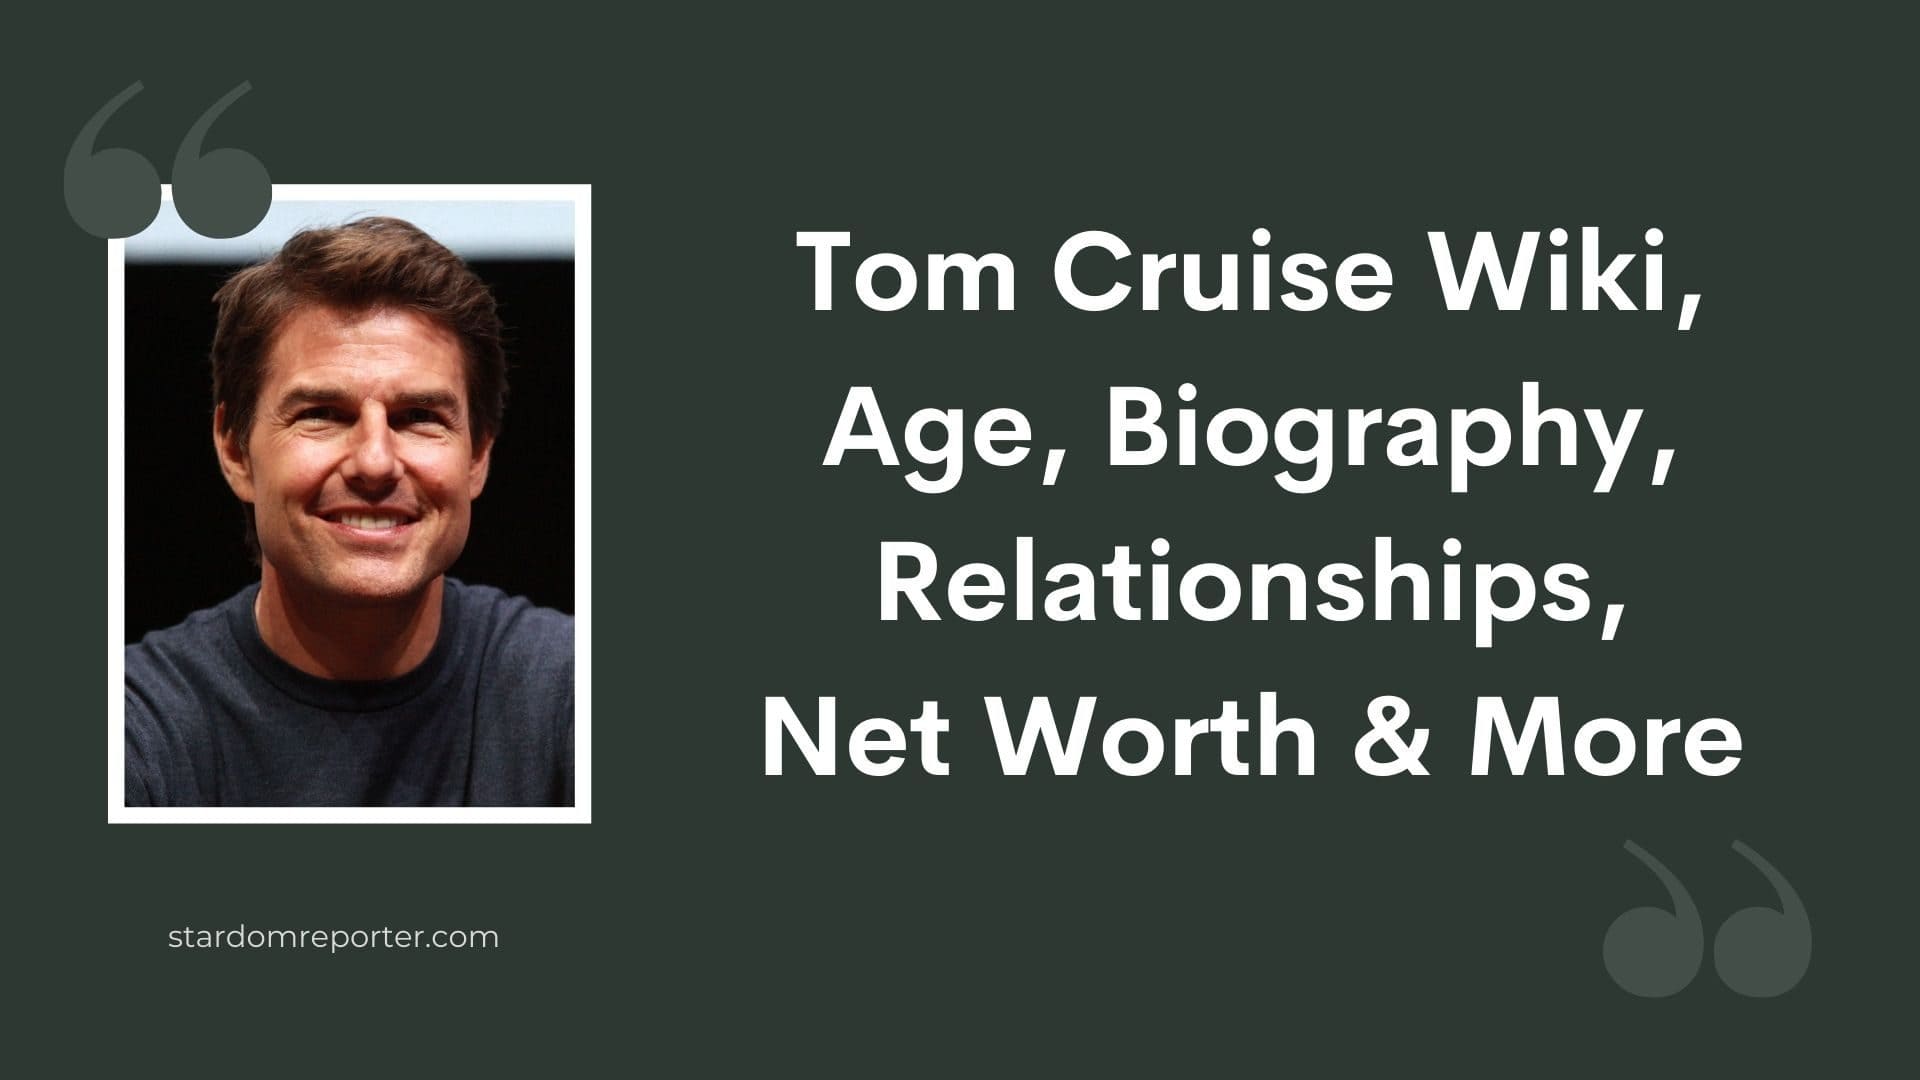 Tom Cruise Wiki, Age, Biography, Relationships, Net Worth & More - 51